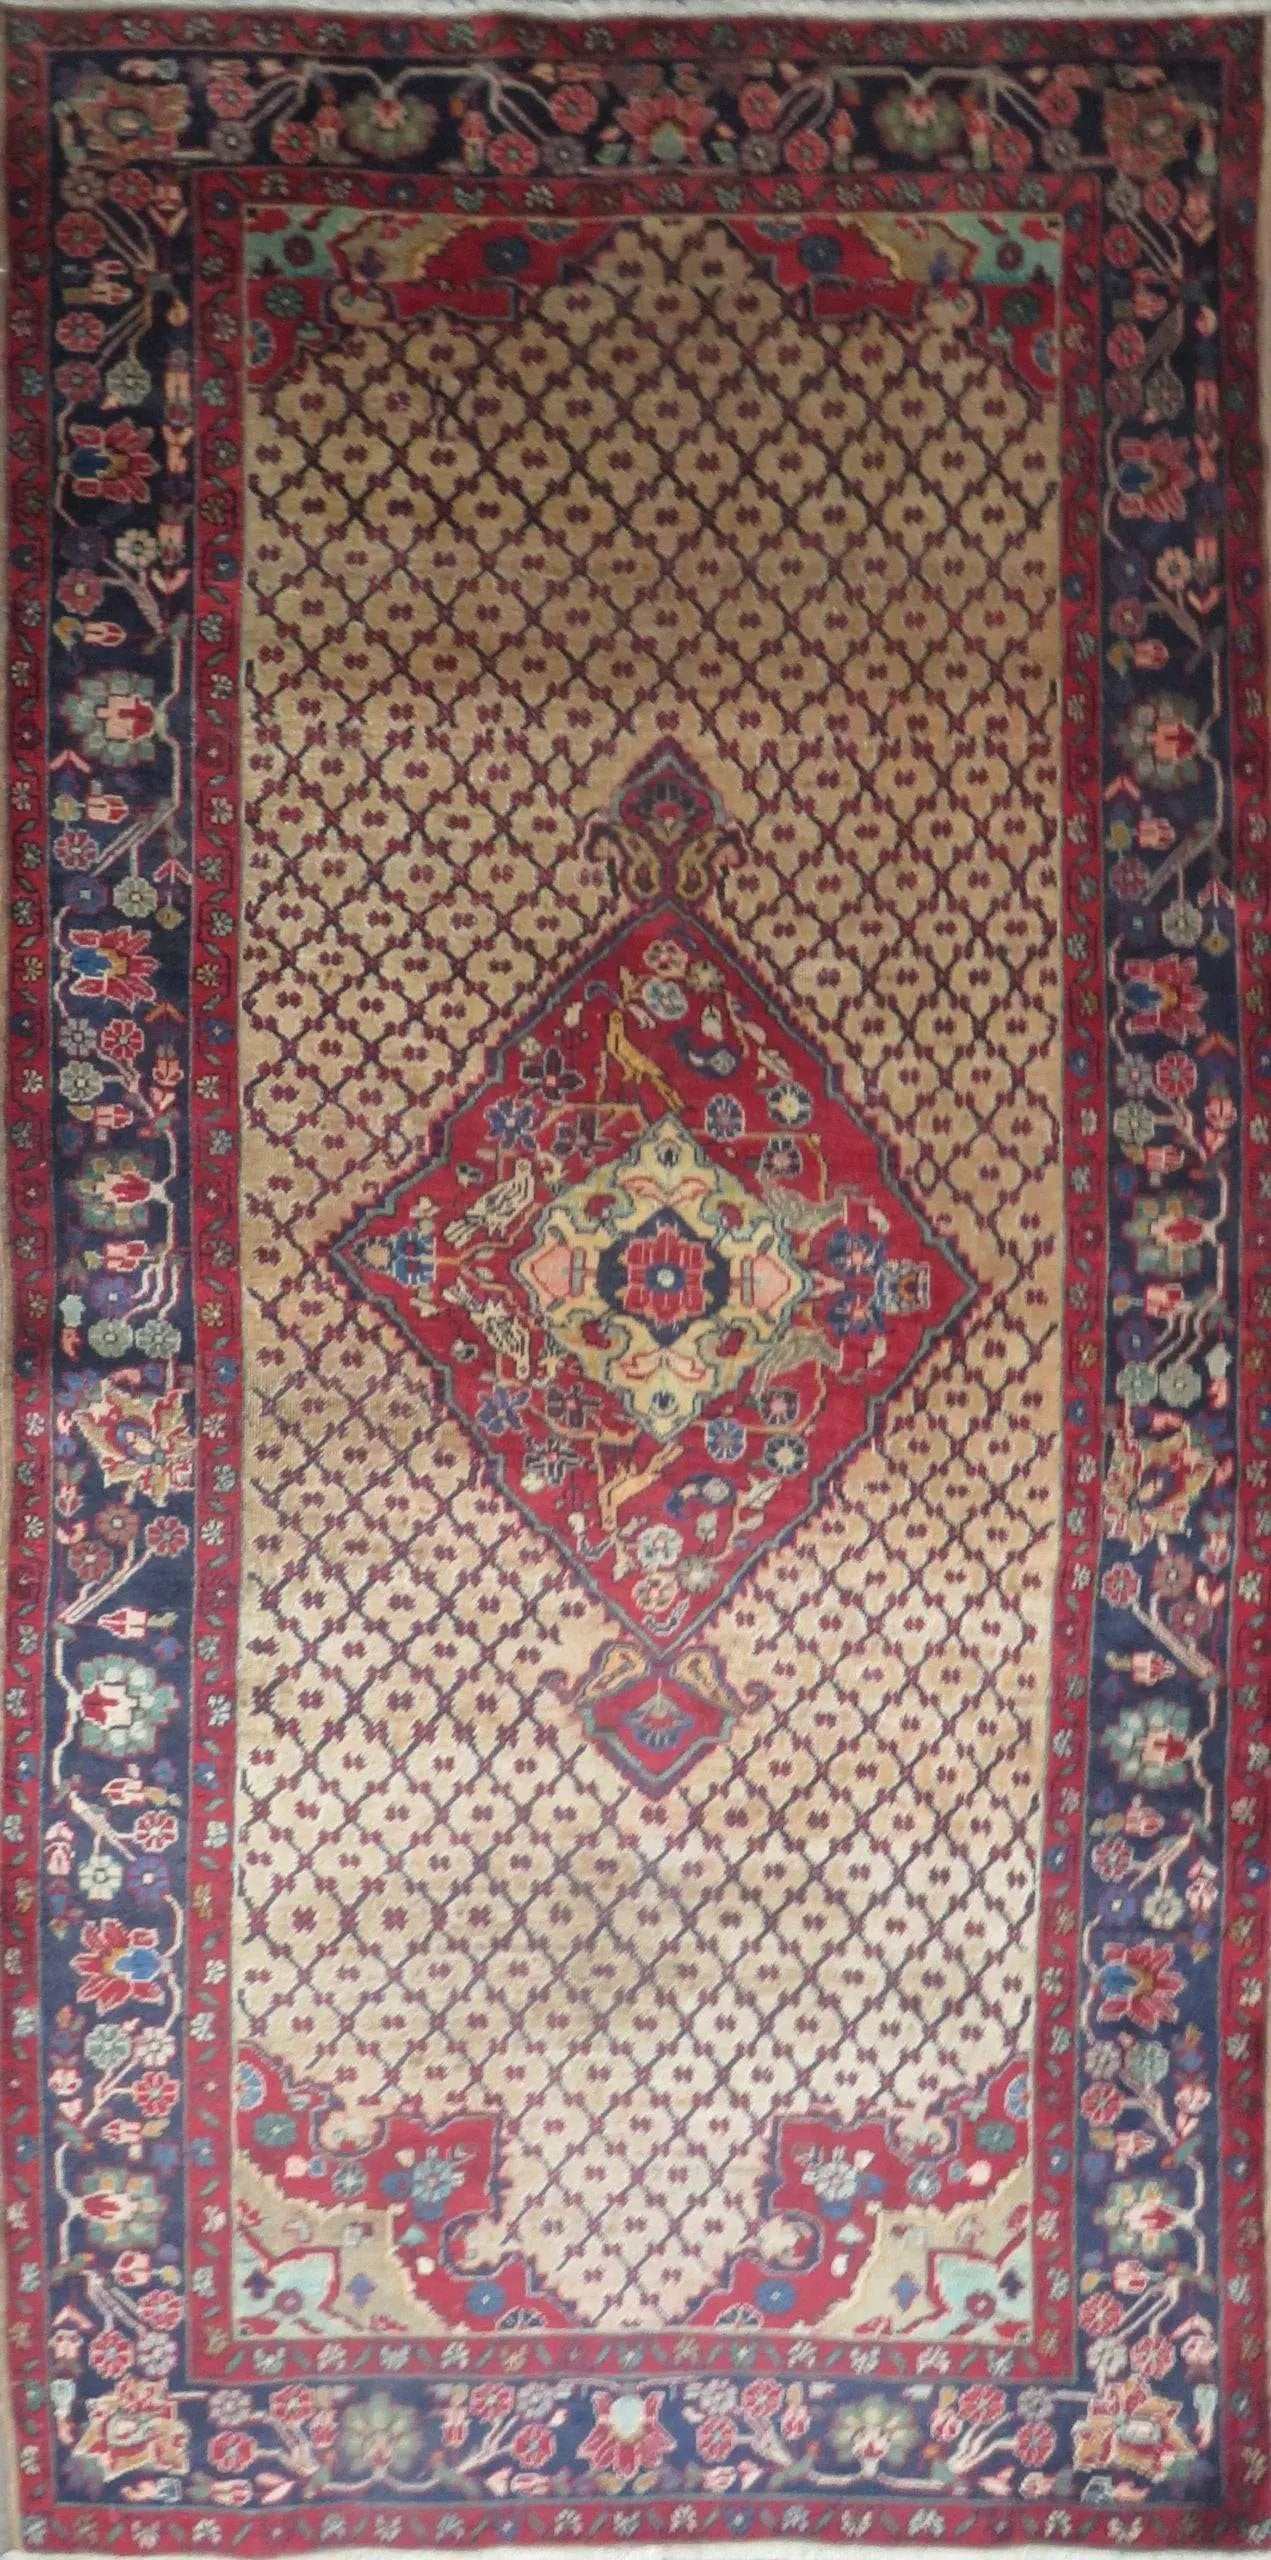 Hand-Knotted Persian Wool Rug _ Luxurious Vintage Design, 10'1" x 4'9", Artisan Crafted